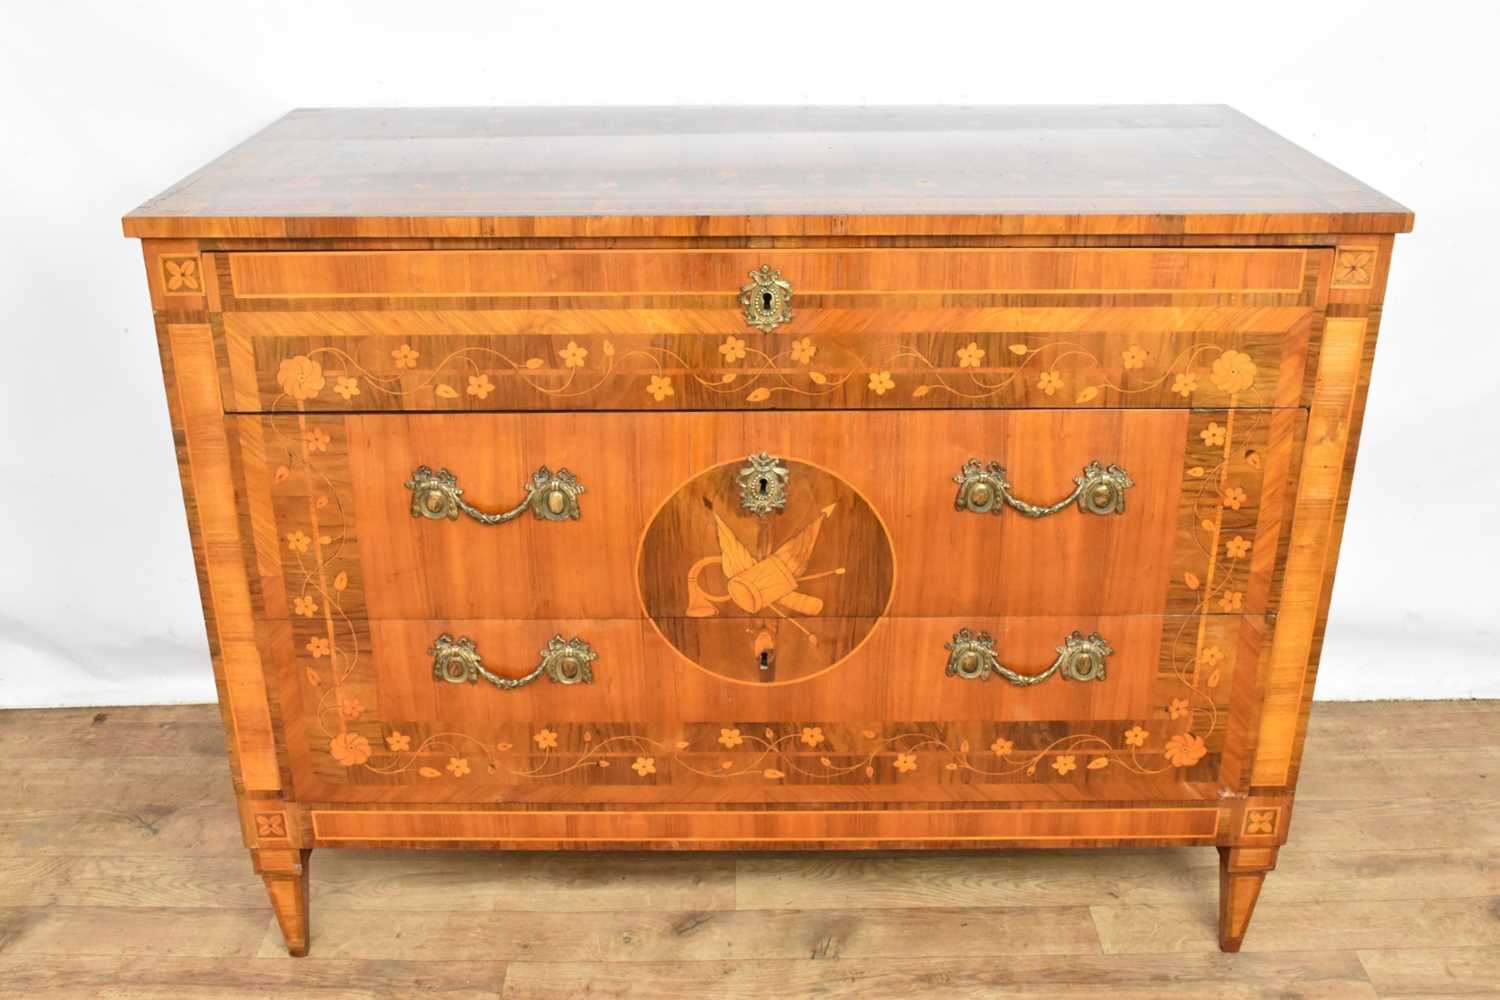 Late 18th century north Italian kingwood and marquetry inlaid commode - Bild 2 aus 21